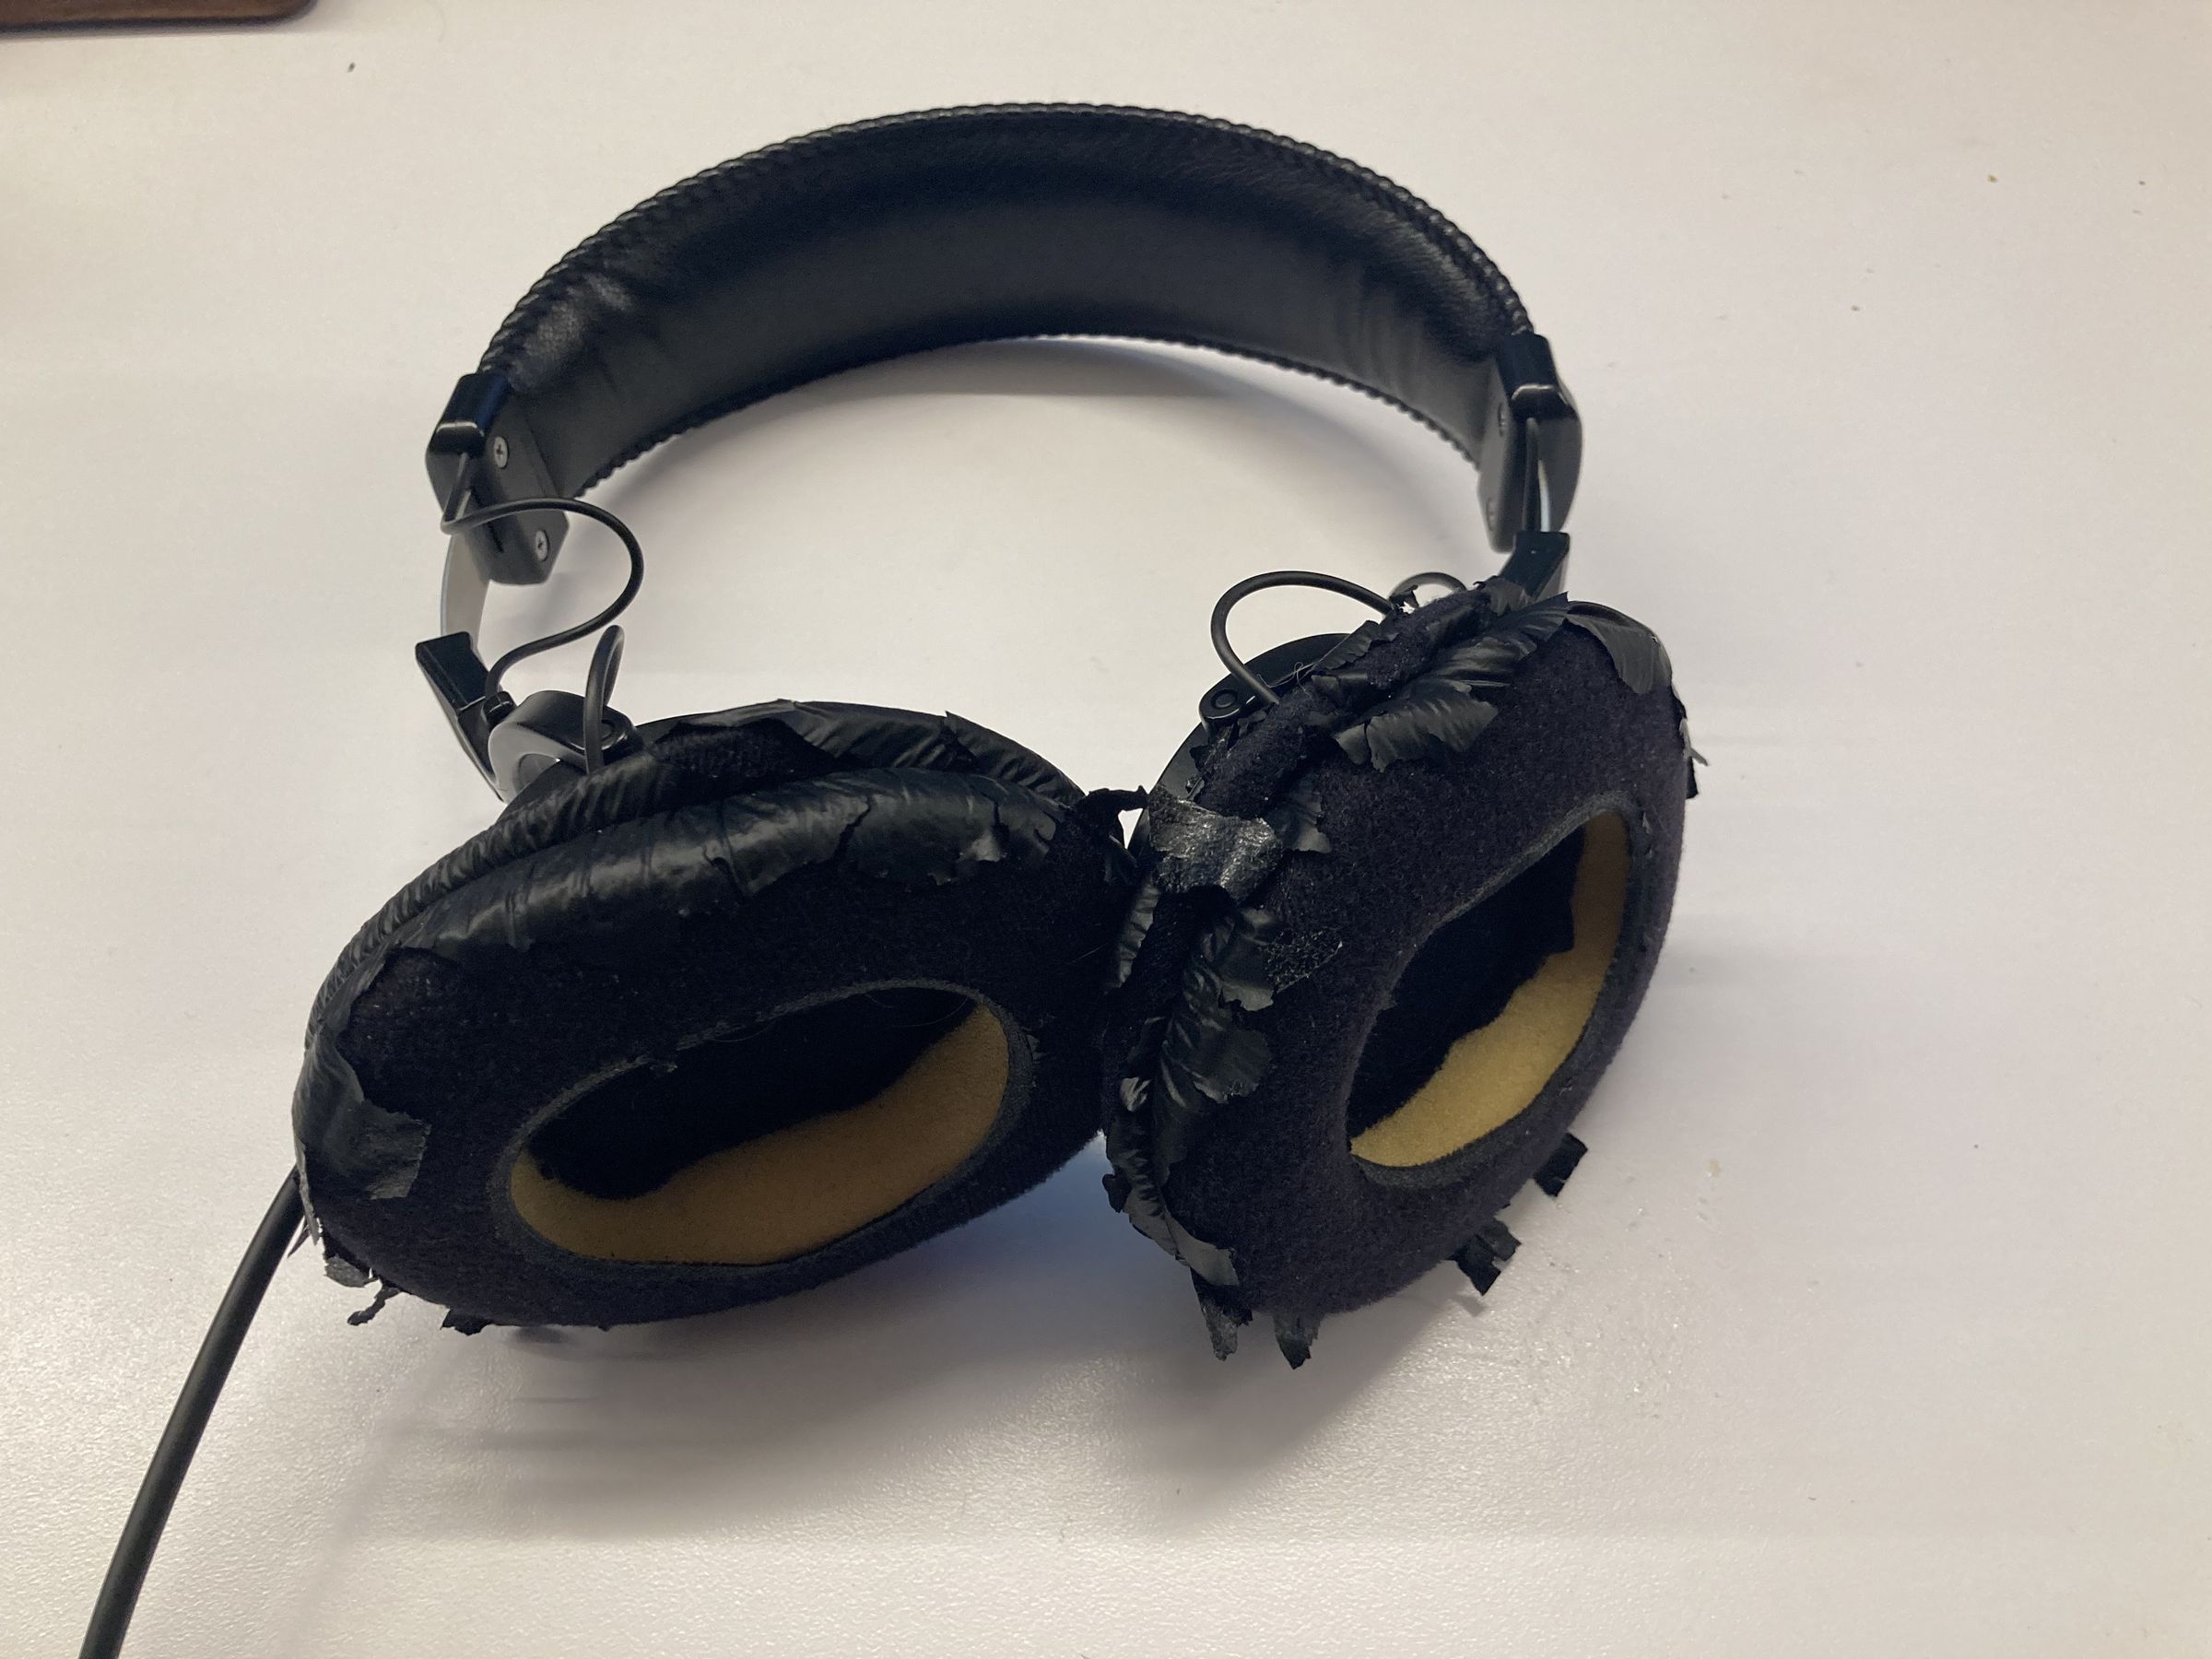 A pair of Sony MDR-7506s with badly damaged ear pads.